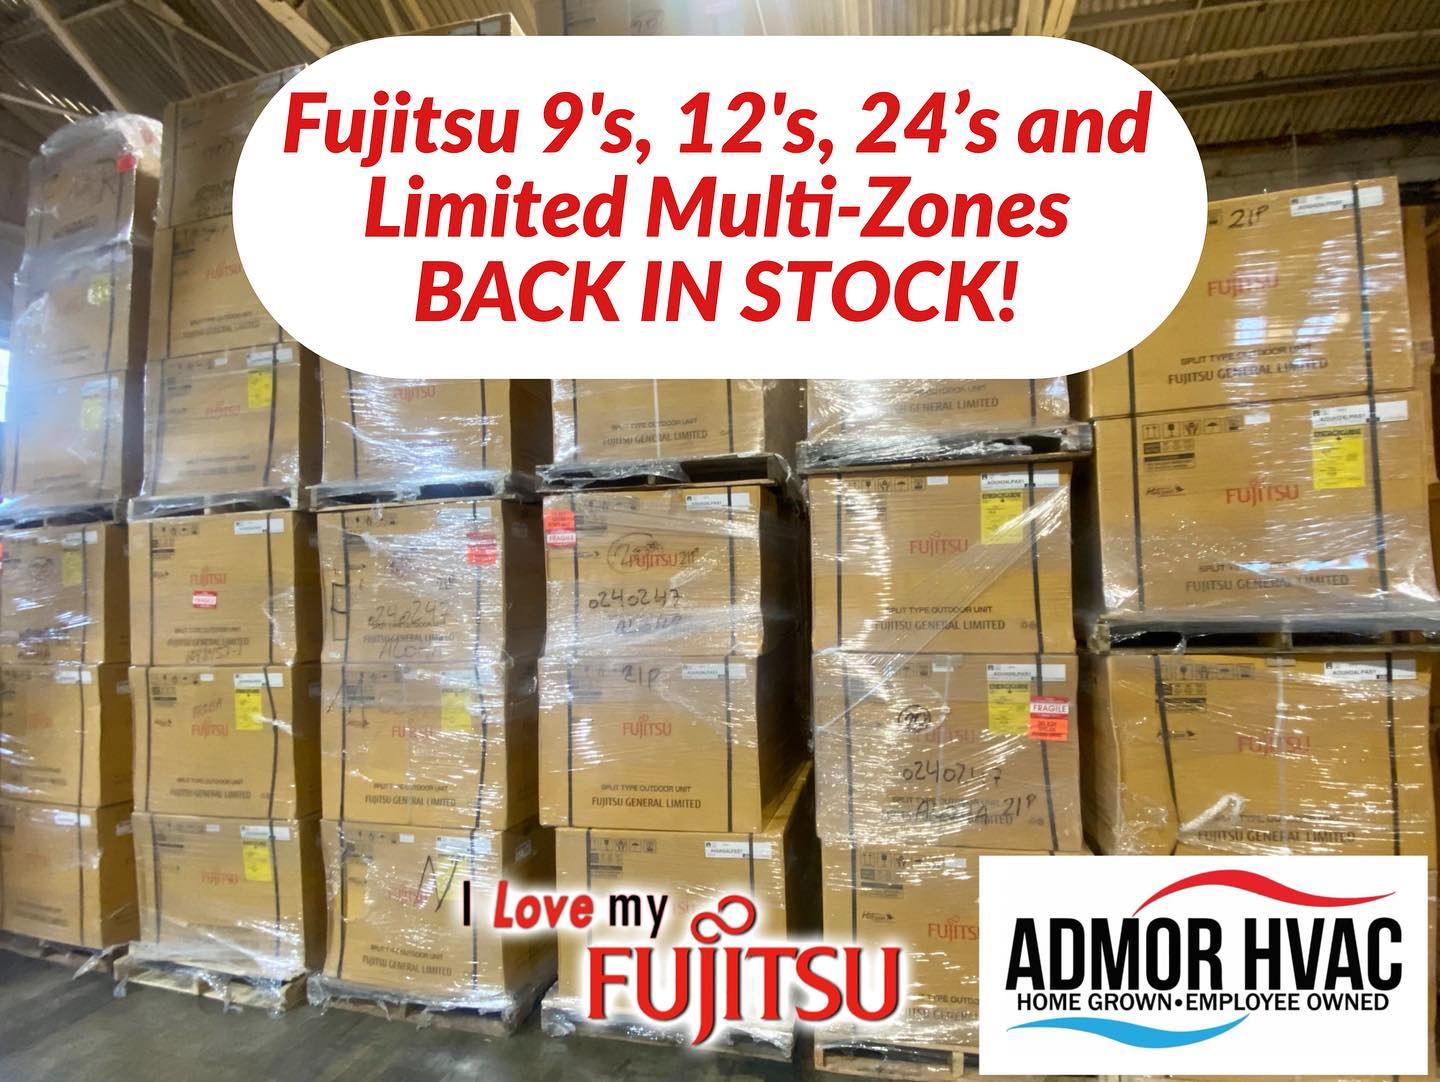 Fujitsu's rolling in.  Pick up your back orders today!
#oahuhvac #mauihvac #kauaihvac #hawaiihvac #hawaiihvaccontractor #hawaiihvacsuperstore #hvac #hvacowner #hvacpro #hvacquality #hvactechnician #hvaccontractor #hvacinstallation #airconditioning #ductlessairconditioning #fujitsu #fujitsuairconditioning